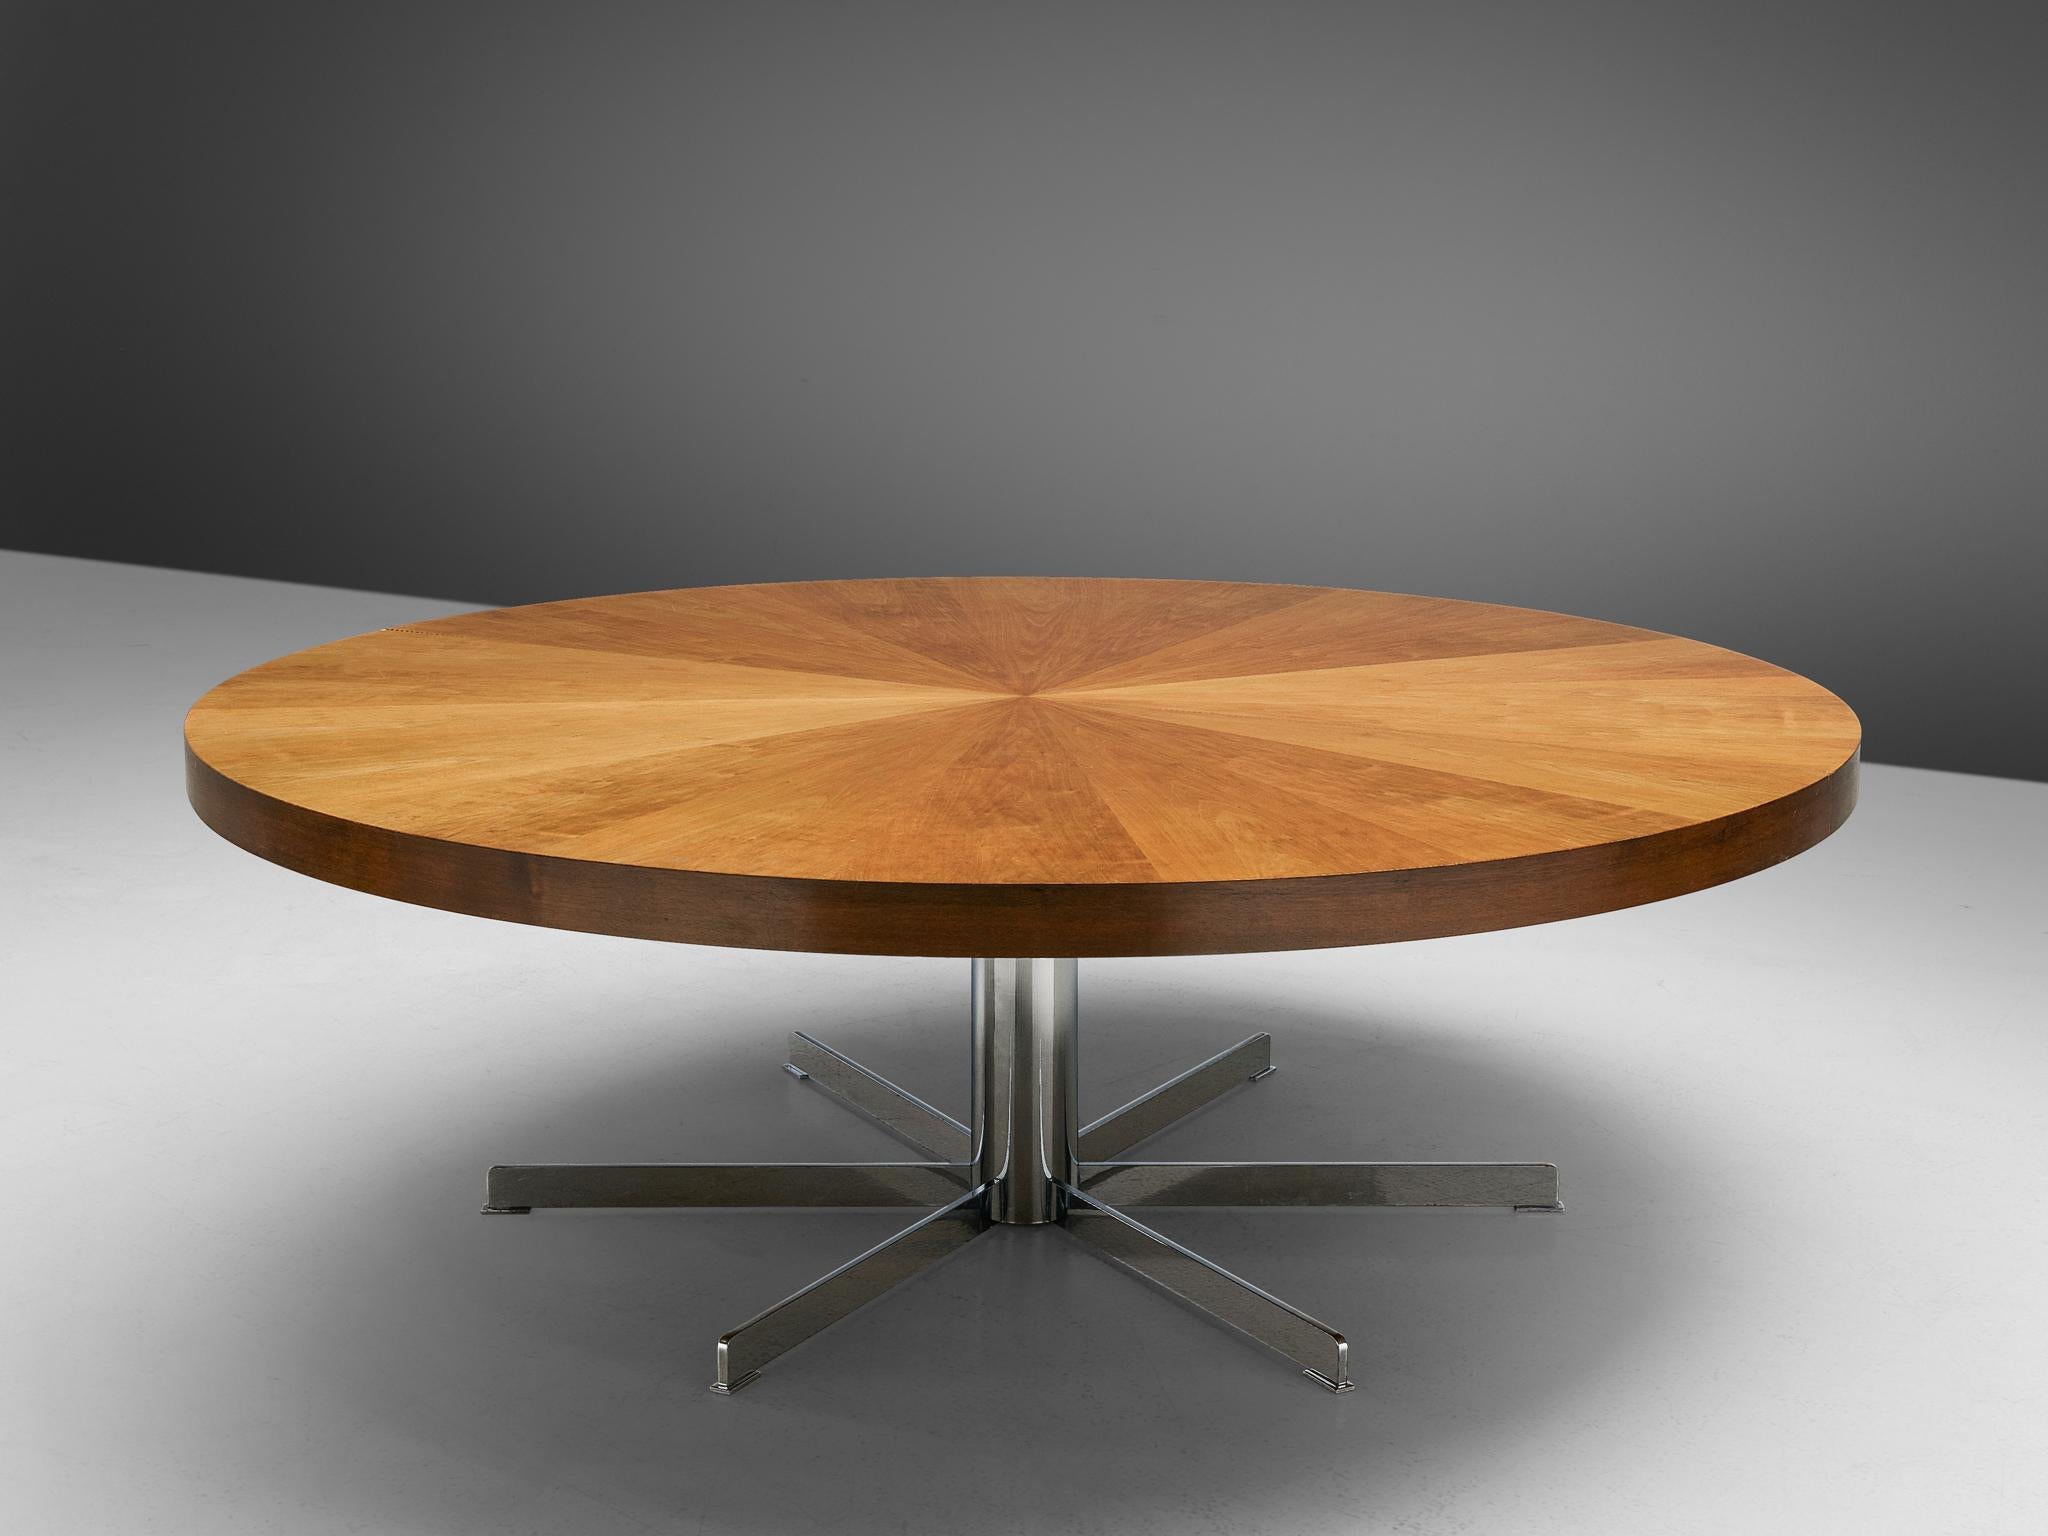 Round dining table, walnut, chrome, Italy, 1970s

Round dining or conference table with a tabletop in walnut. On a chrome pedestal with a six star foot the round top is resting. The walnut veneer is arranged geometric in a star-like look. With the